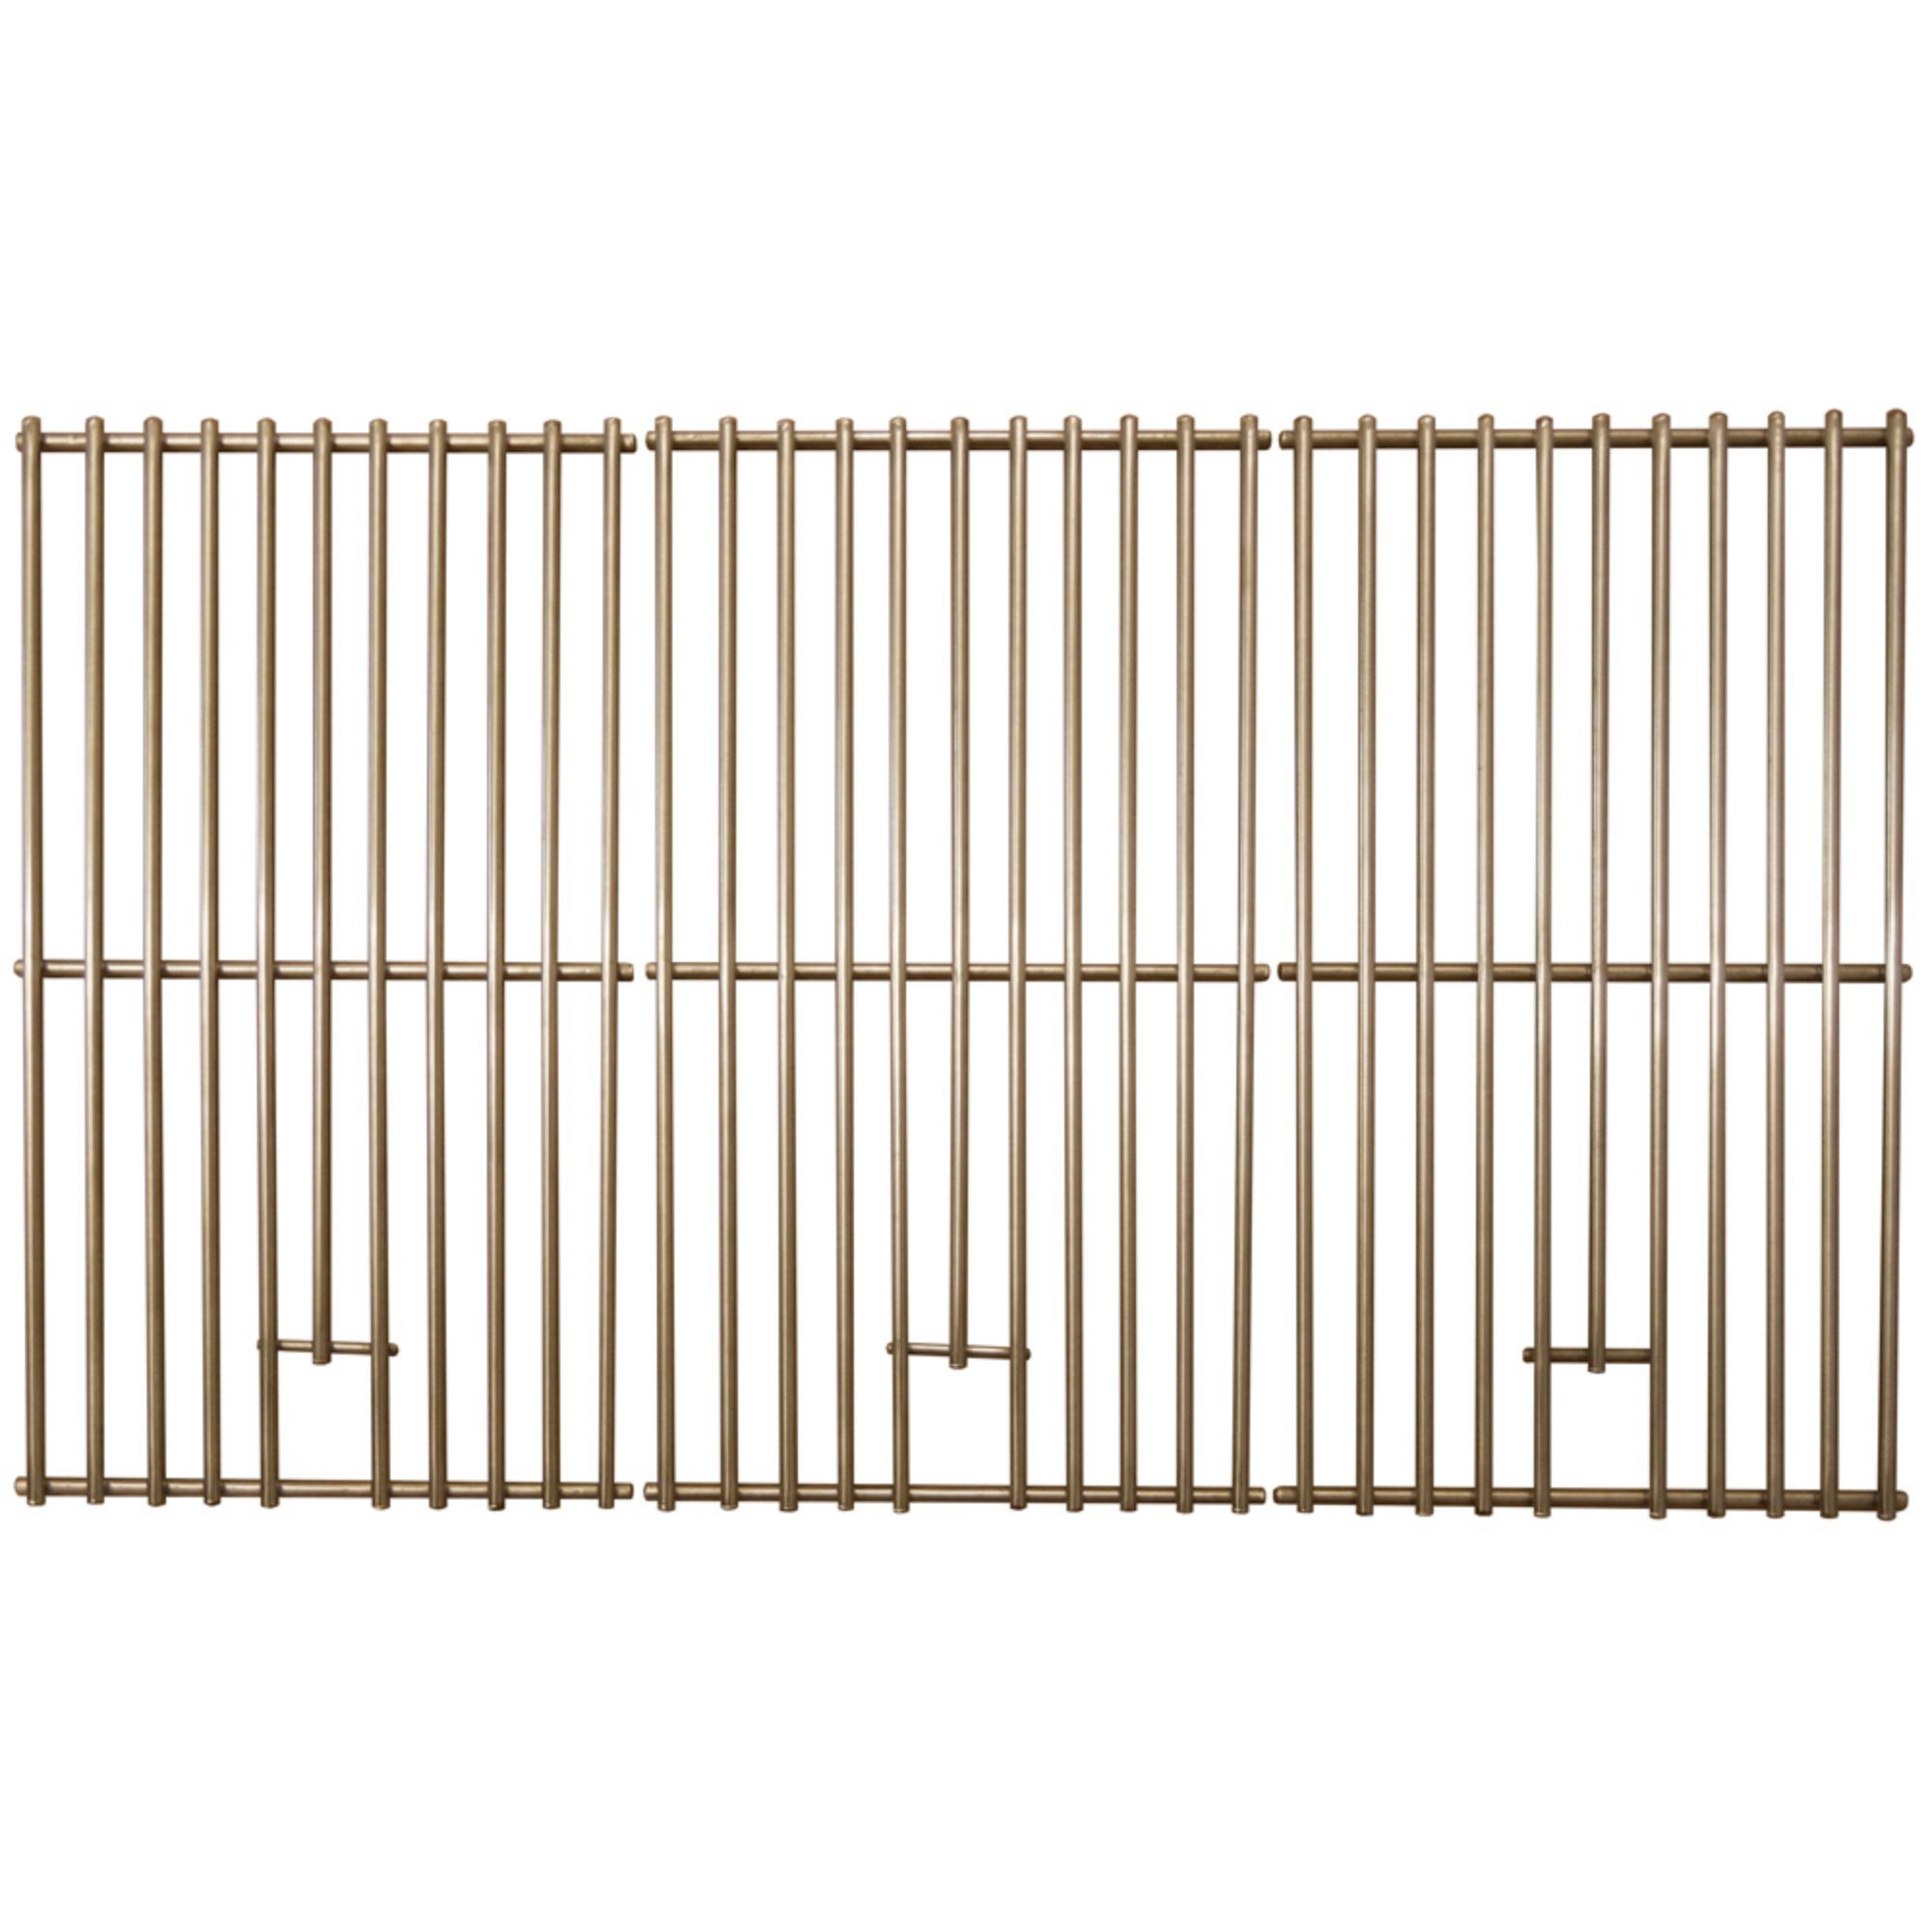 Stainless steel clad wire cooking grid for Nexgrill brand gas grills